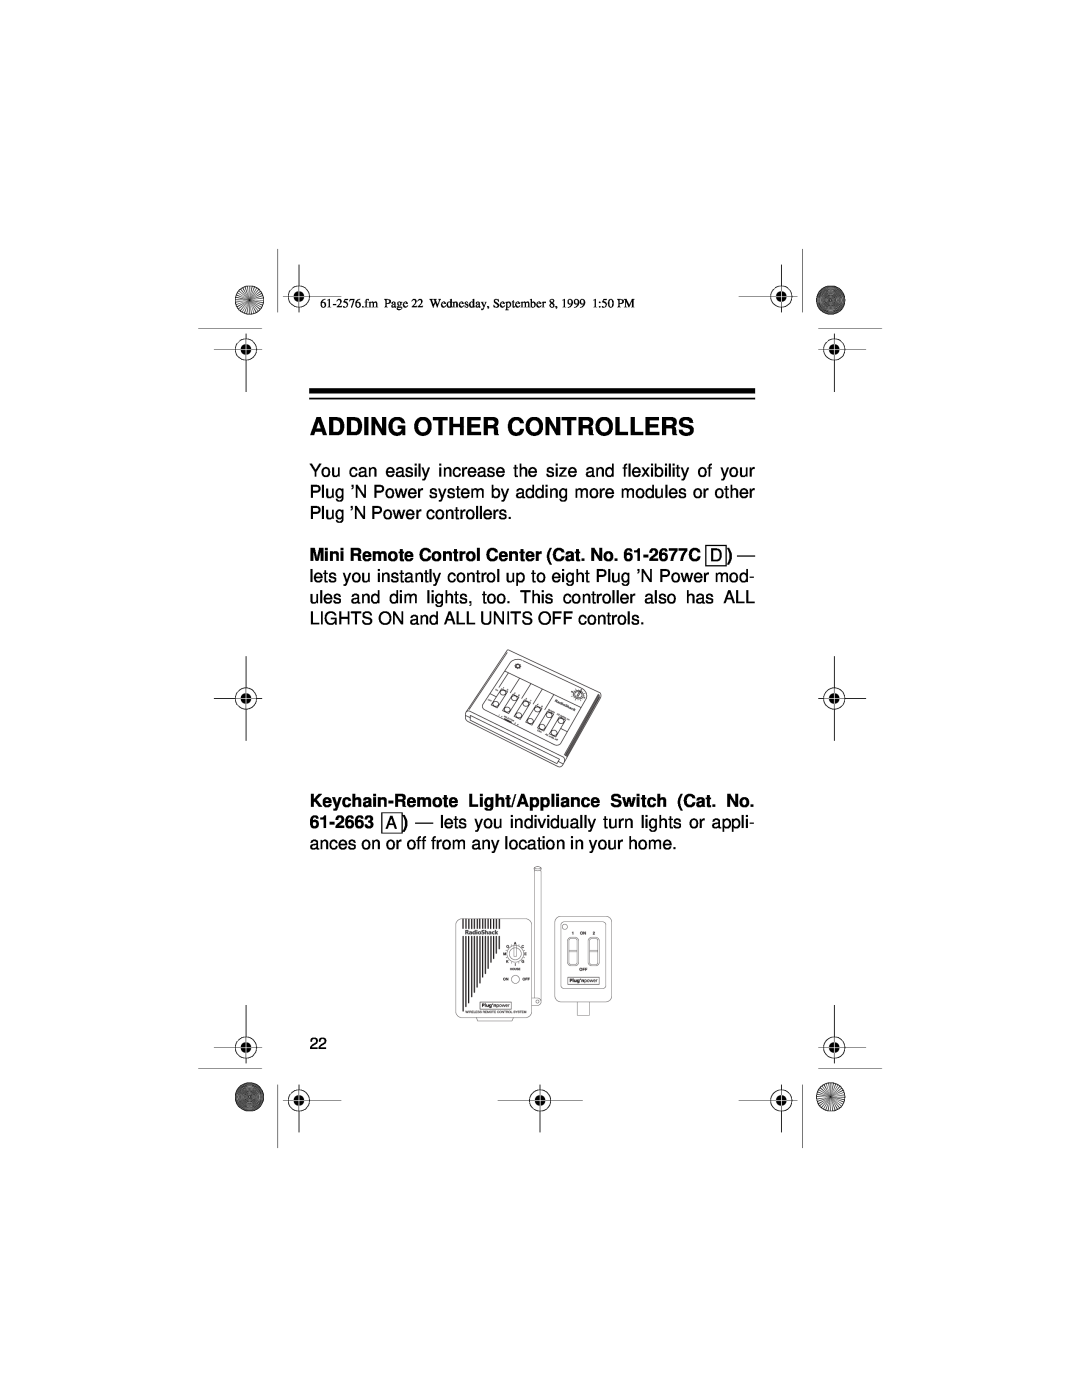 Radio Shack Wireless Remote Control System Adding Other Controllers, fm Page 22 Wednesday, September 8, 1999 150 PM 